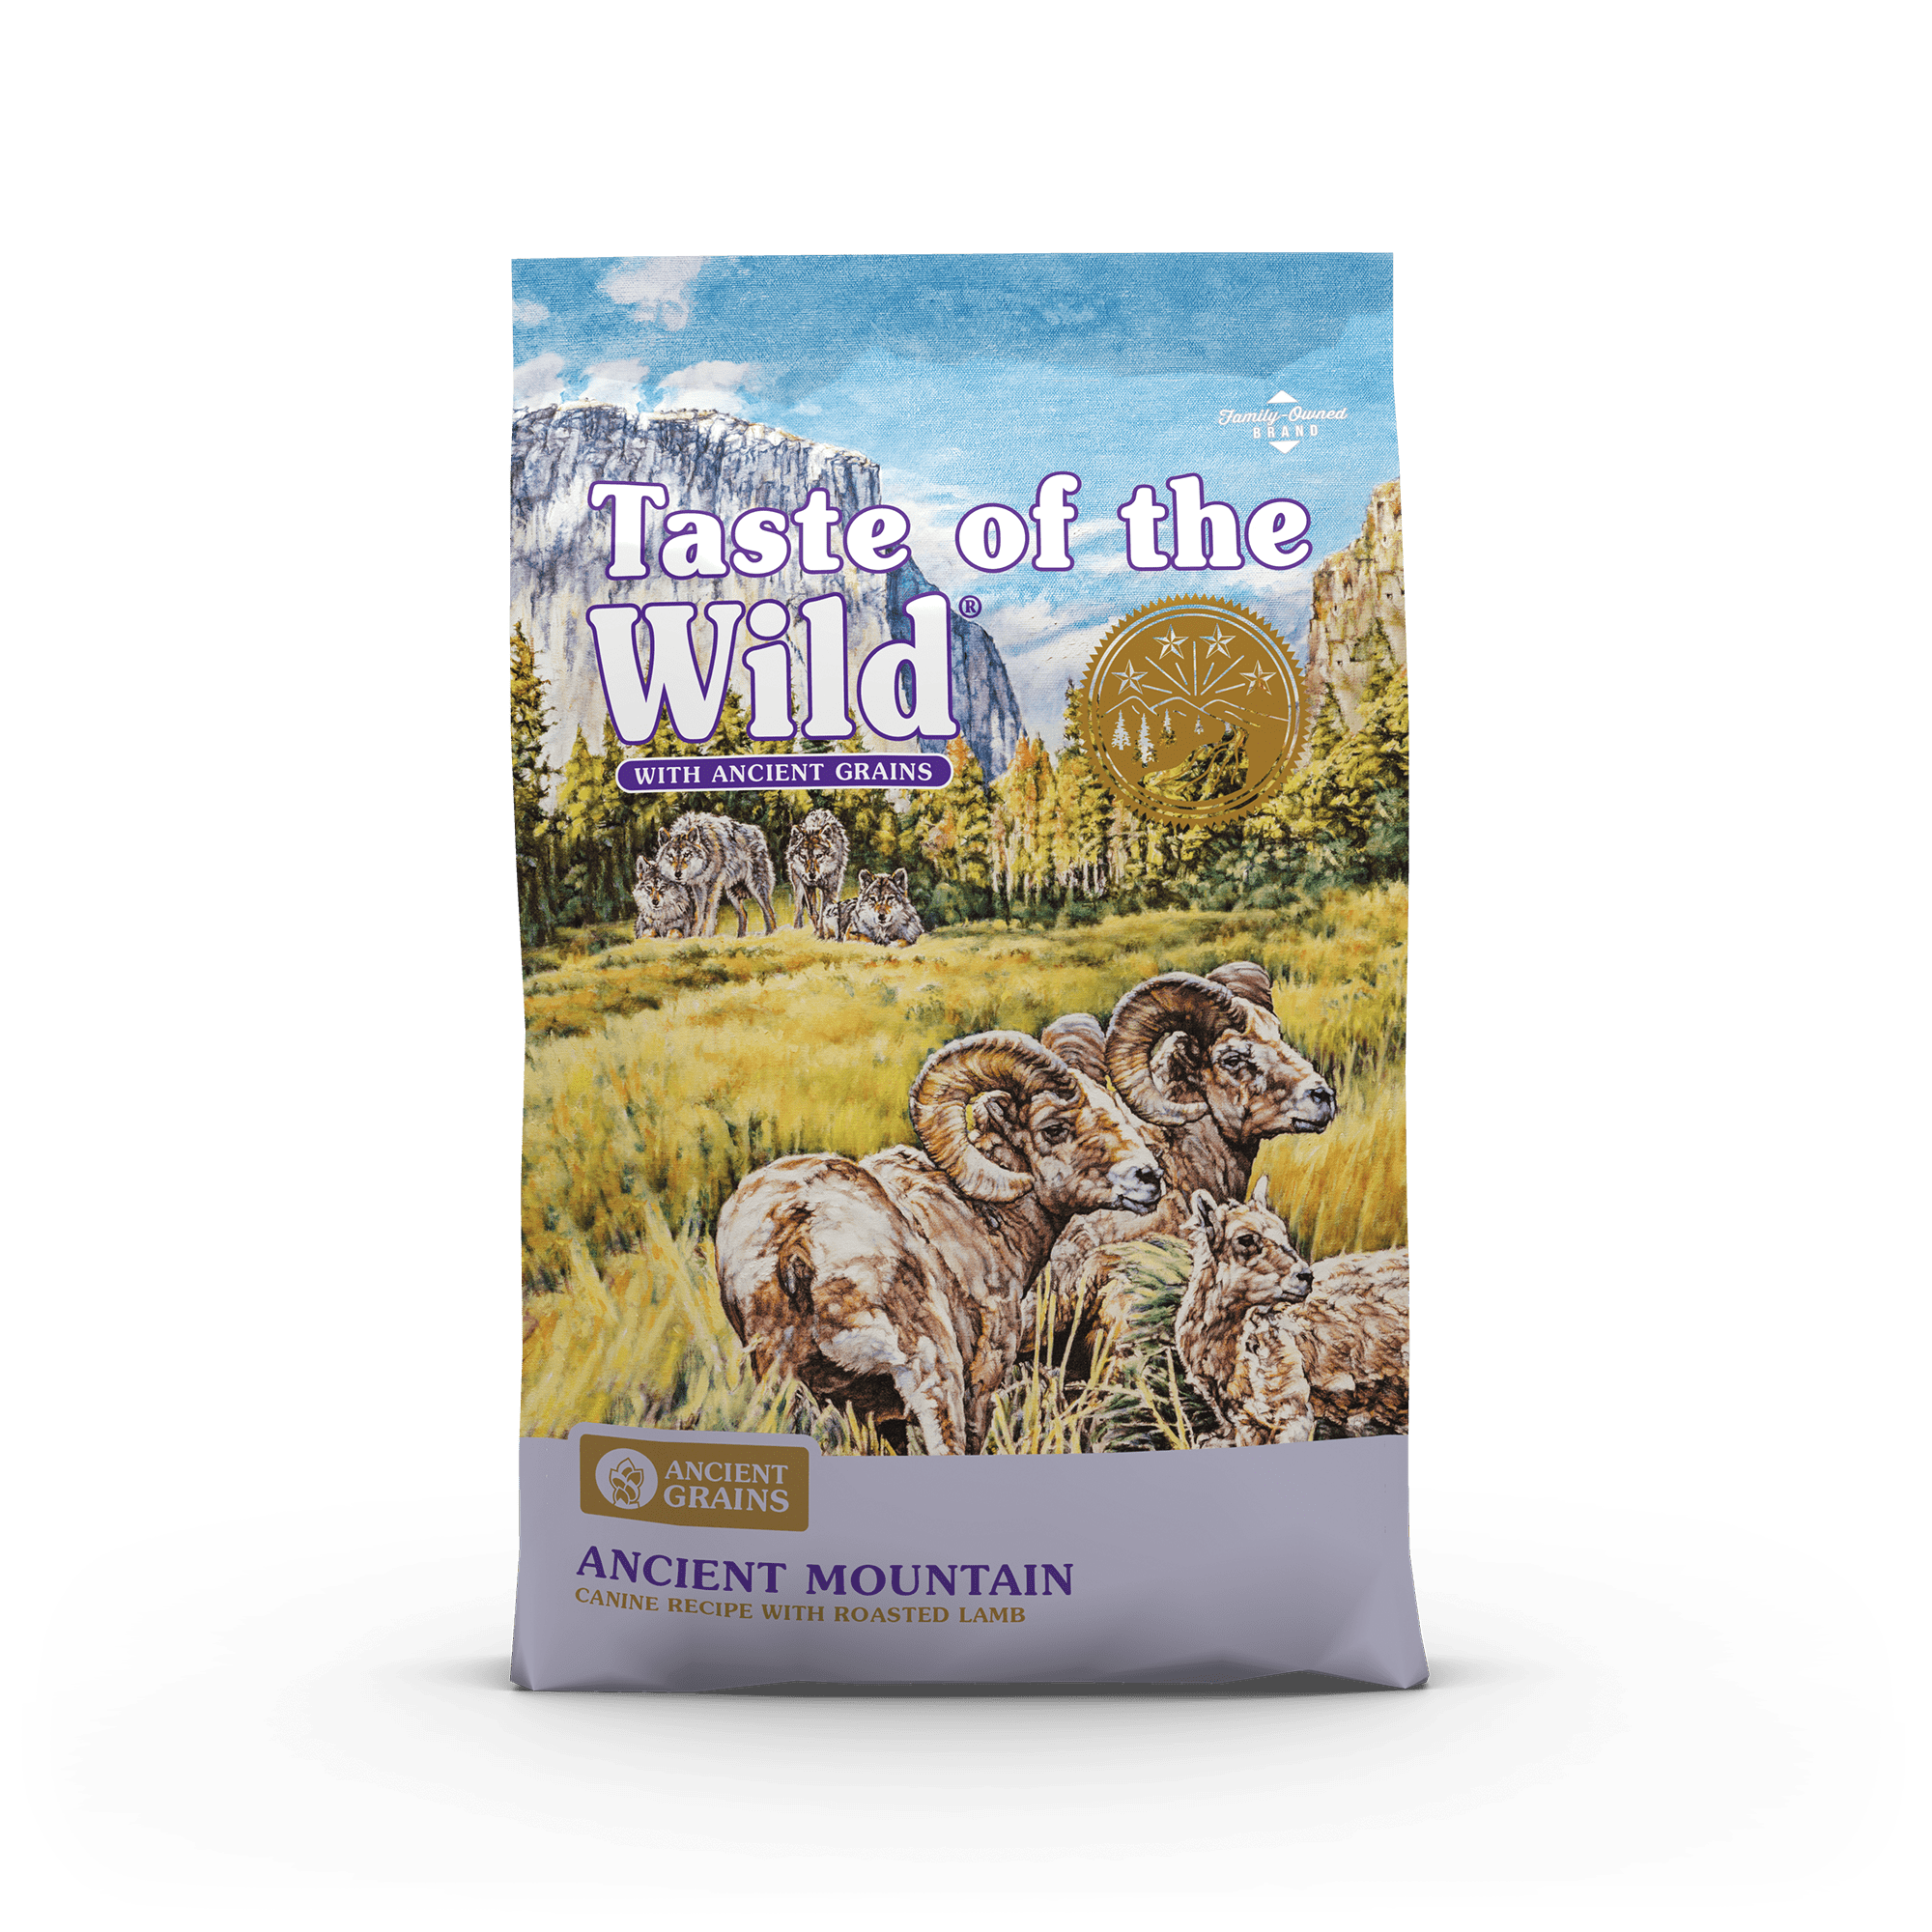 Taste of the Wild Ancient Grains  Ancient Mountain Canine Recipe